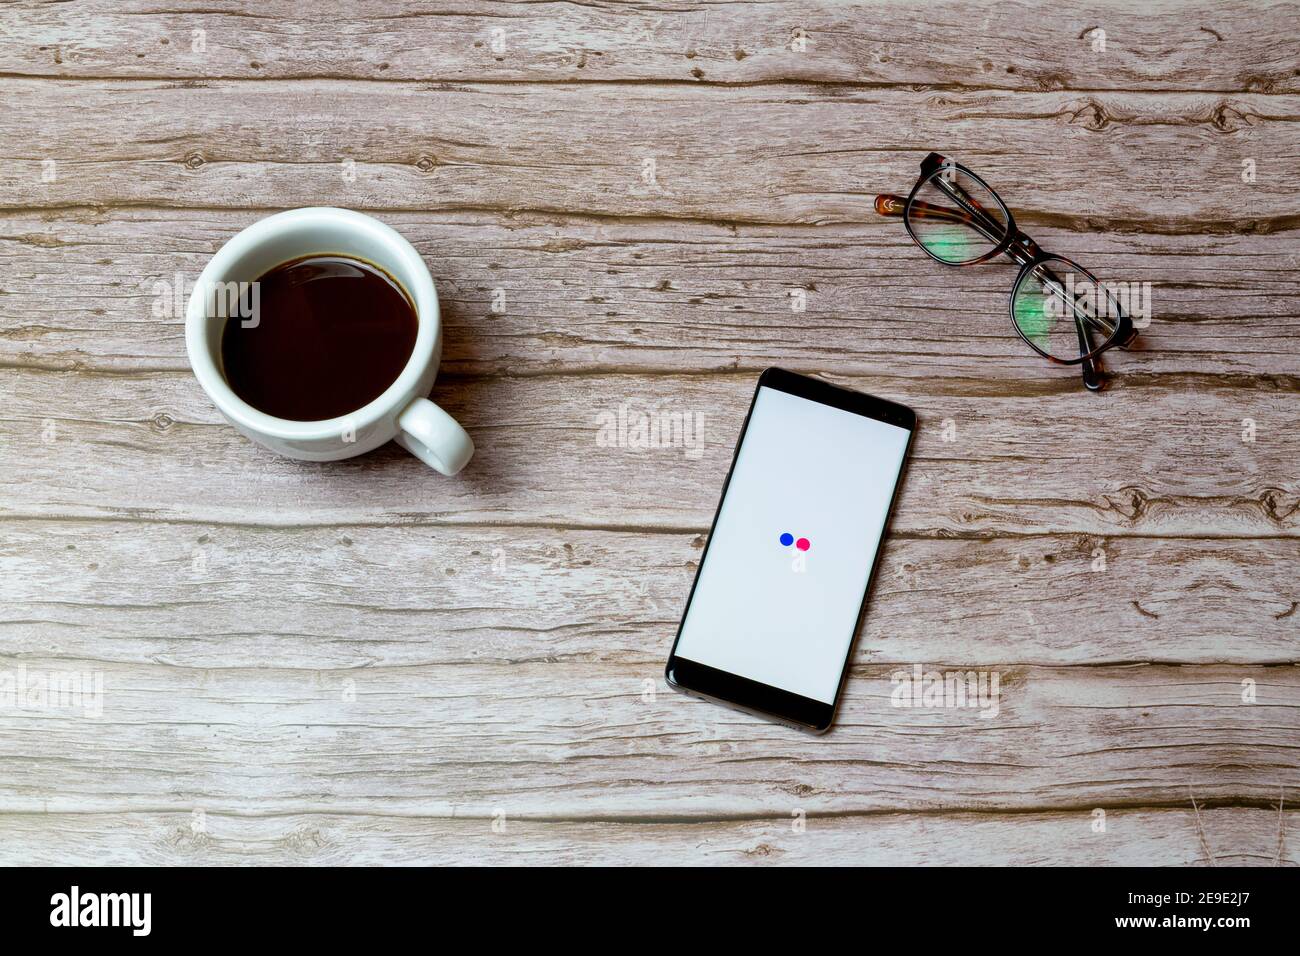 A Mobile phone or cell phone laid on a table or desk with the Flickr app open and a coffee next to it Stock Photo